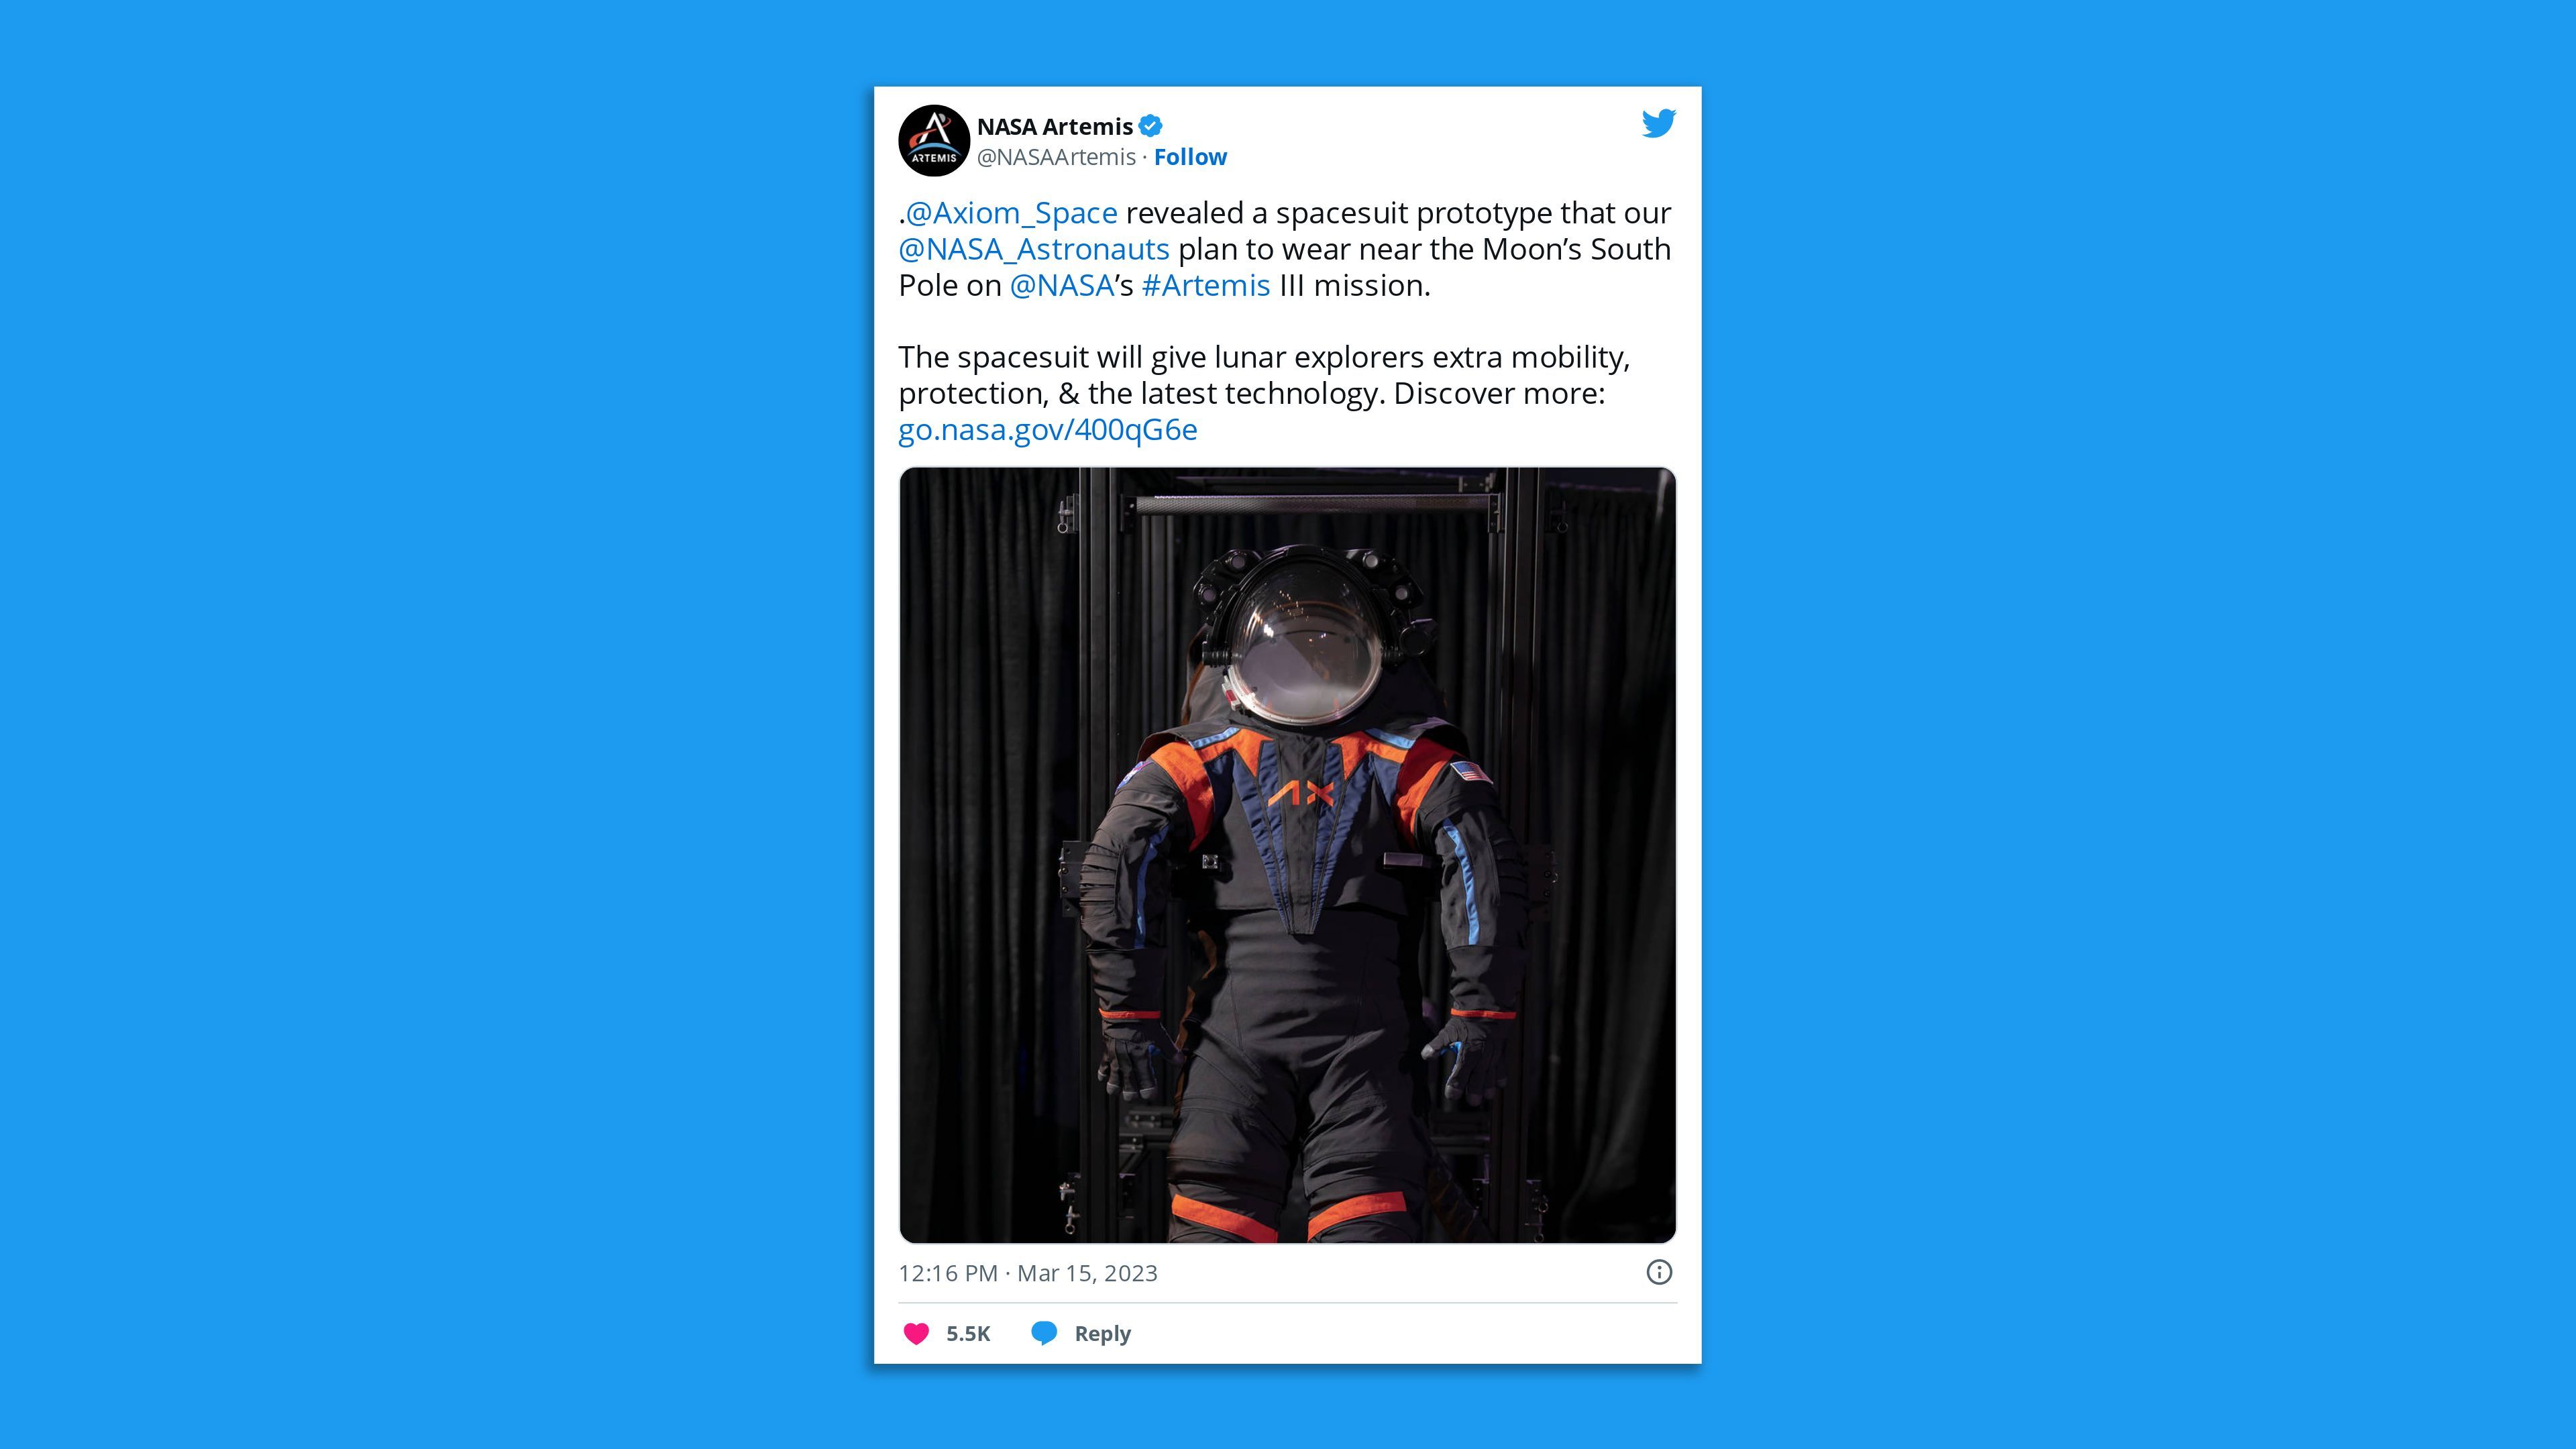 A screenshot of a NASA Artemes tweet stating: ". @Axiom_Space  revealed a spacesuit prototype that our  @NASA_Astronauts  plan to wear near the Moon’s South Pole on  @NASA ’s #Artemis III mission.   The spacesuit will give lunar explorers extra mobility, protection, & the latest technology."